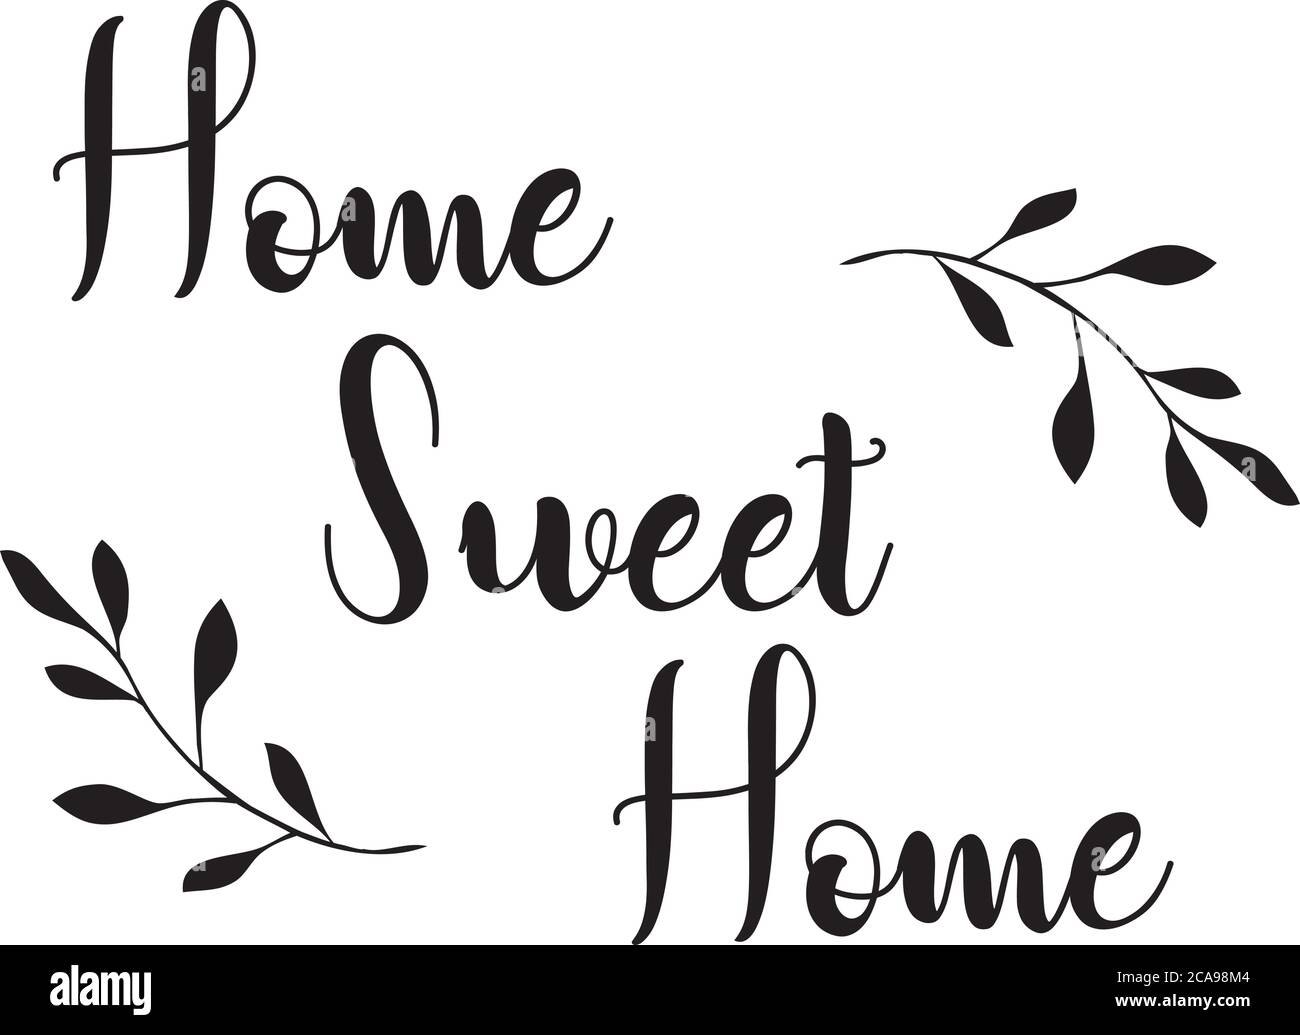 vector illustration of home sweet home. handwriting background. Stock Vector